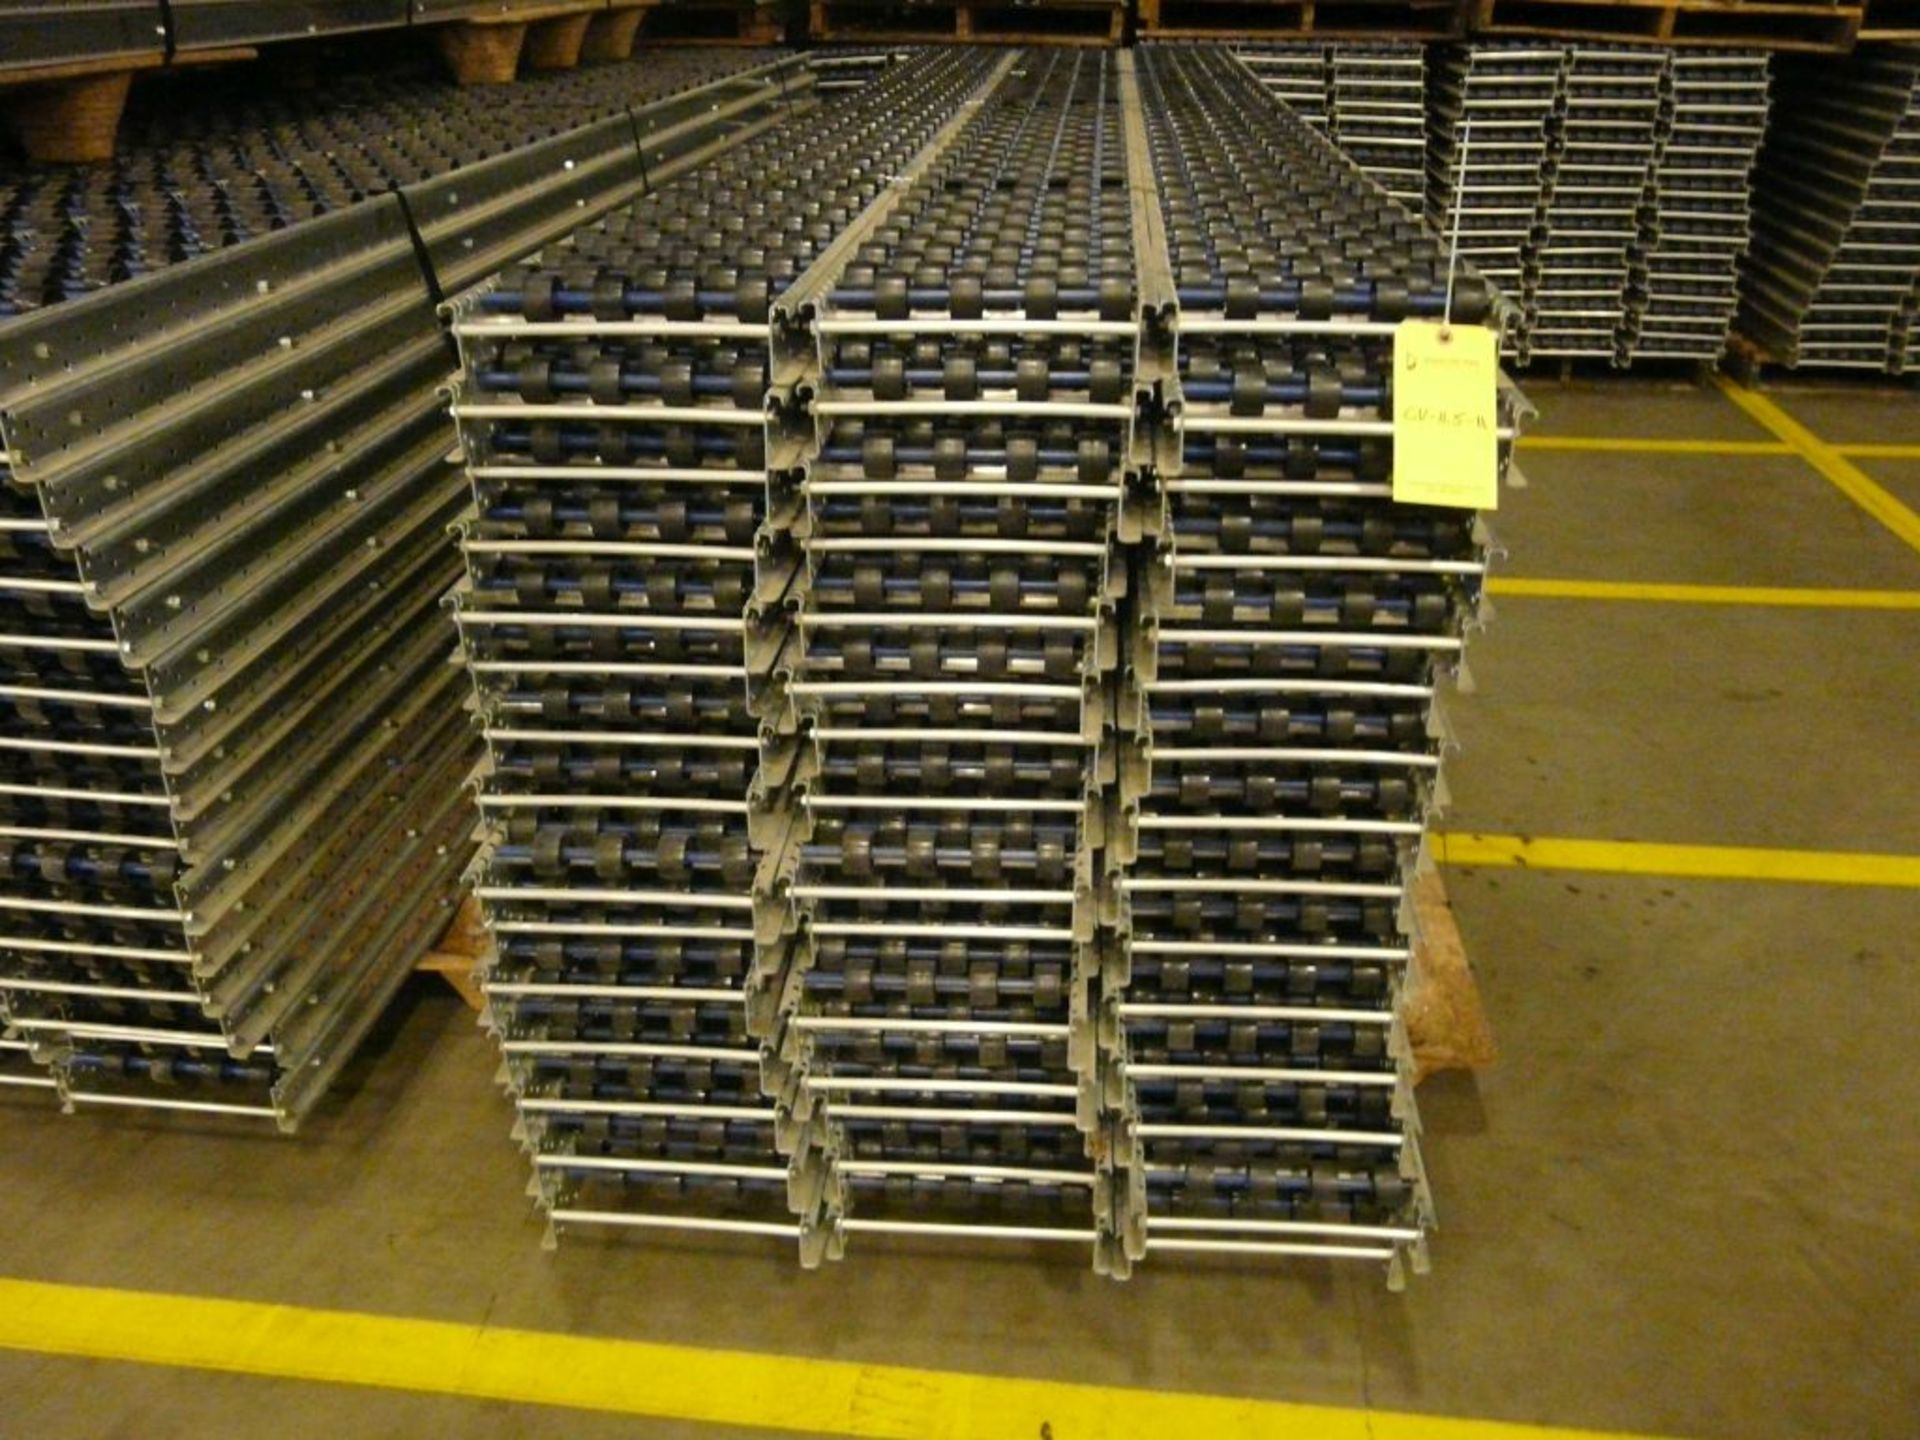 Lot of (90) SpanTrack Wheelbed Carton Flow Conveyors - 11.5'L x 11"W; Tag: 223555 - $30 Lot - Image 2 of 4